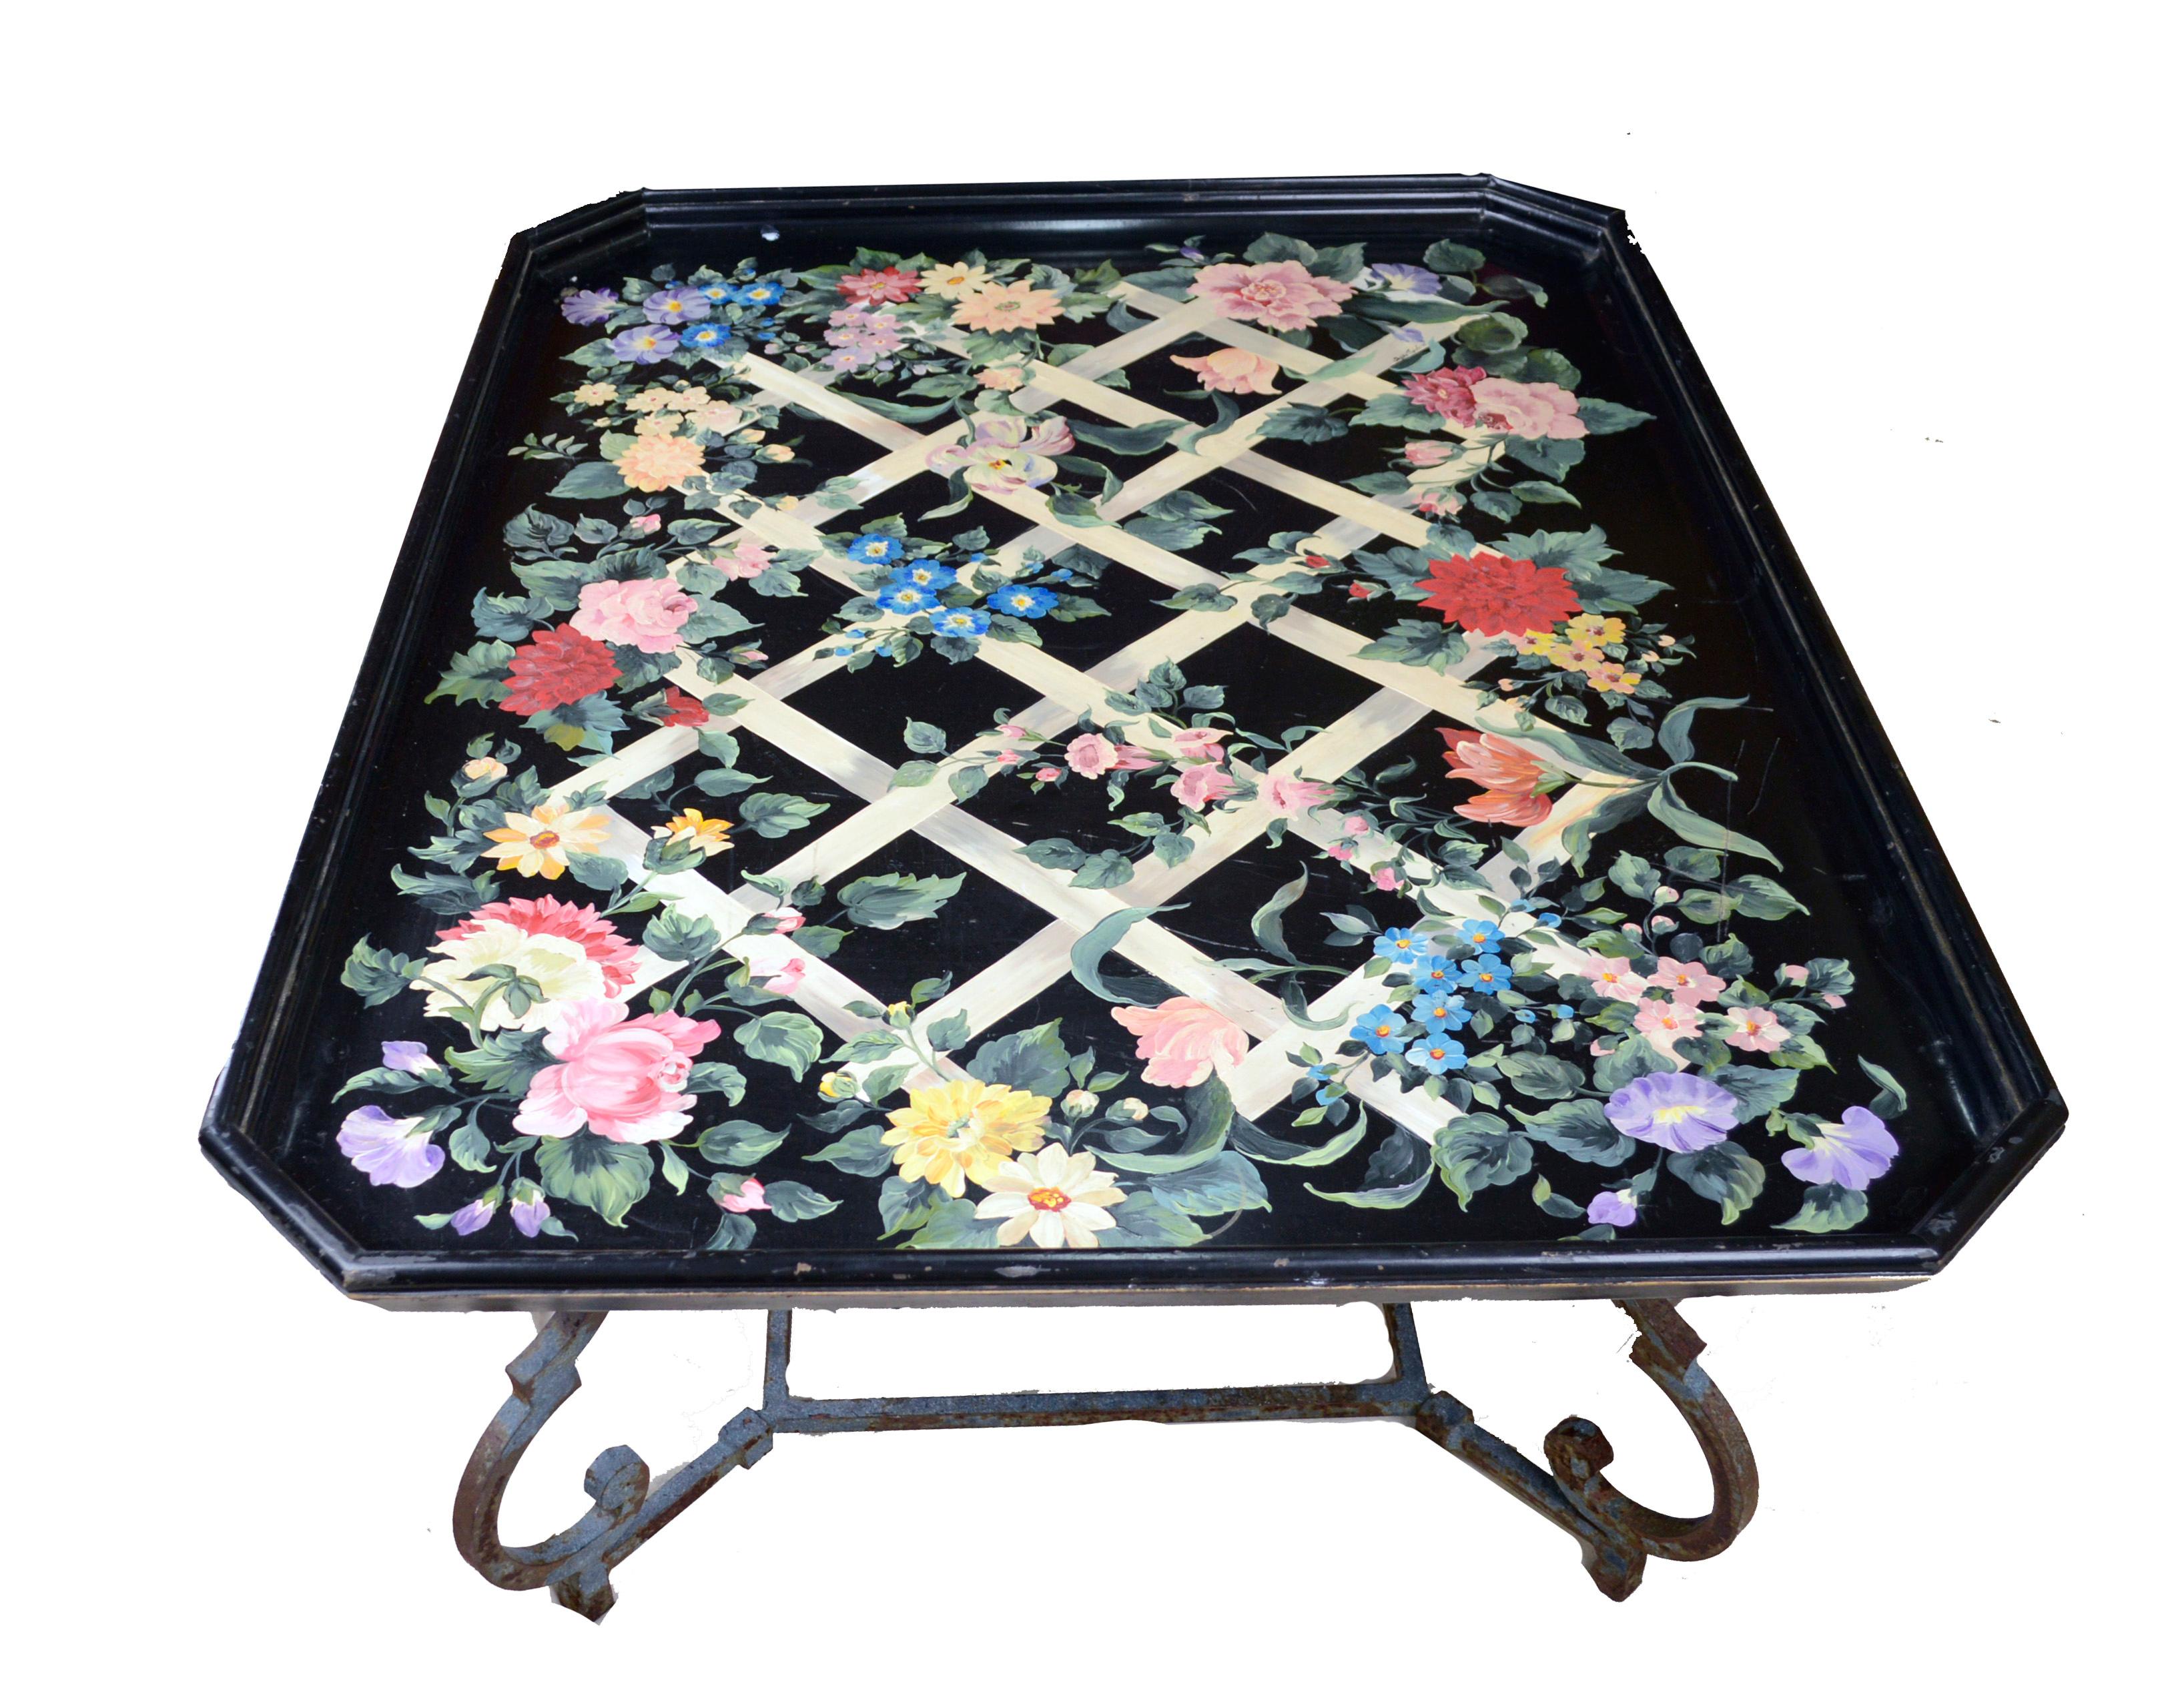 Wrought Iron Tole Painting Lattice Work design Large Tray Table Painted by Shari Tipich For Sale